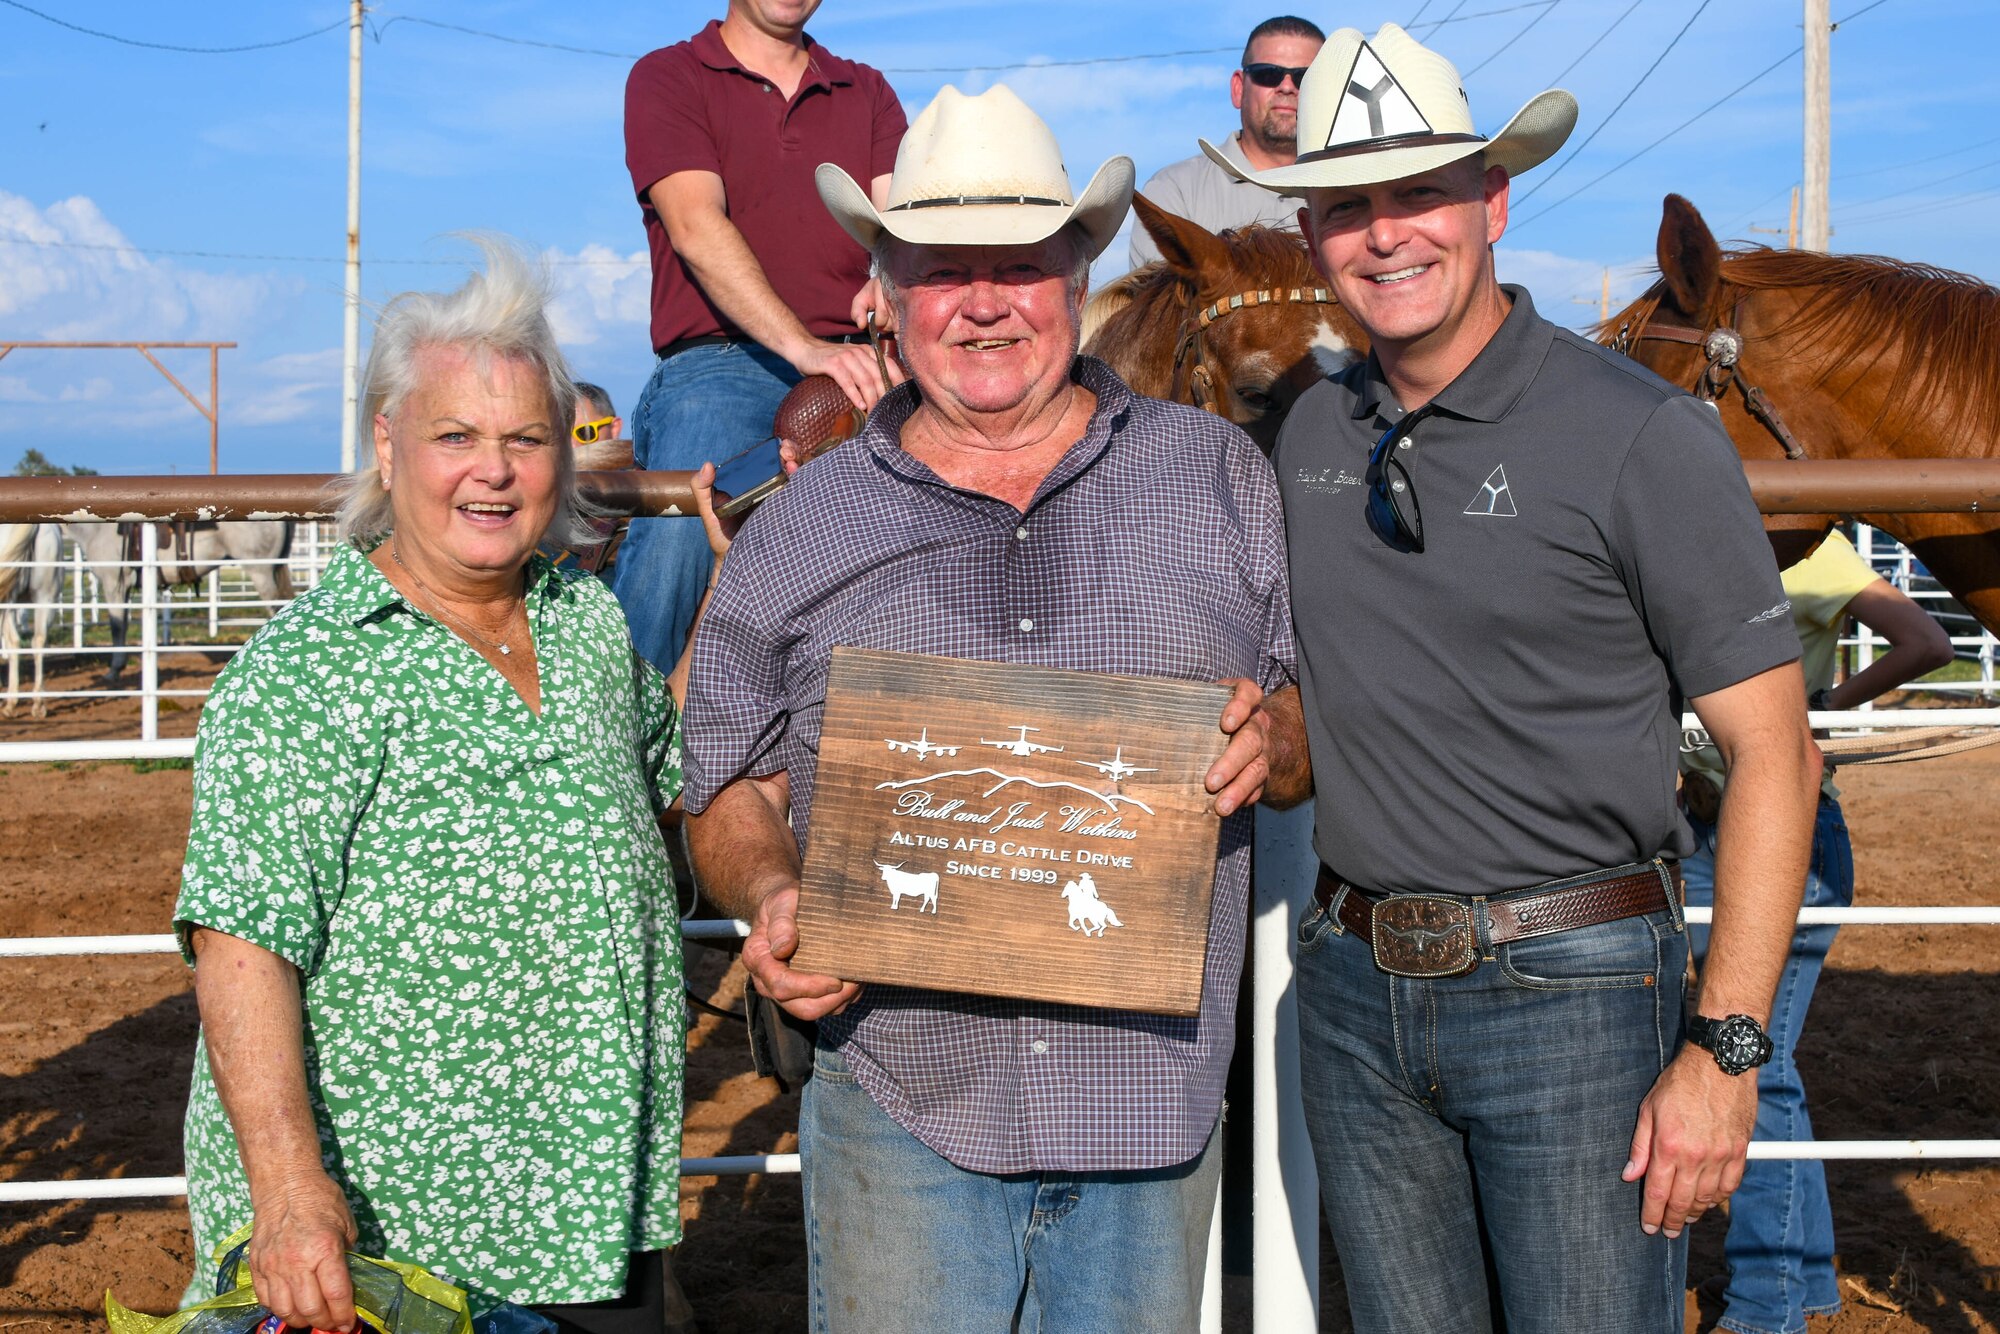 Gary “Bull” Watkins, a friend of Altus since 2011 and rancher (center), and his wife, Jude, pose with U.S. Air Force Col. Blaine Baker, 97th Air Mobility Wing commander, at the Watkins’ ranch in Altus, Oklahoma, Aug. 24, 2022. Watkins has given back to his community in many ways, serving18 years on the Altus City Council and as vice mayor for two of those years. (U.S. Air Force photo by Senior Airman Trenton Jancze)